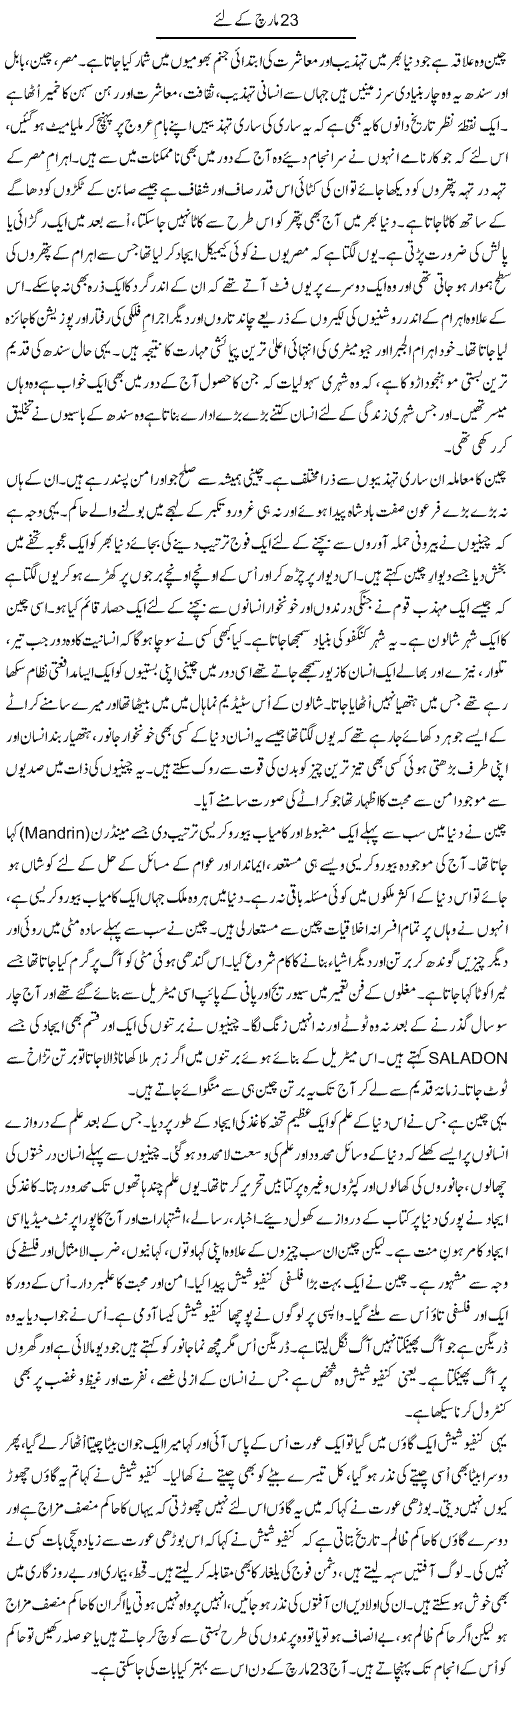 For 23 March Express Column Orya Maqbool 23 March 2011